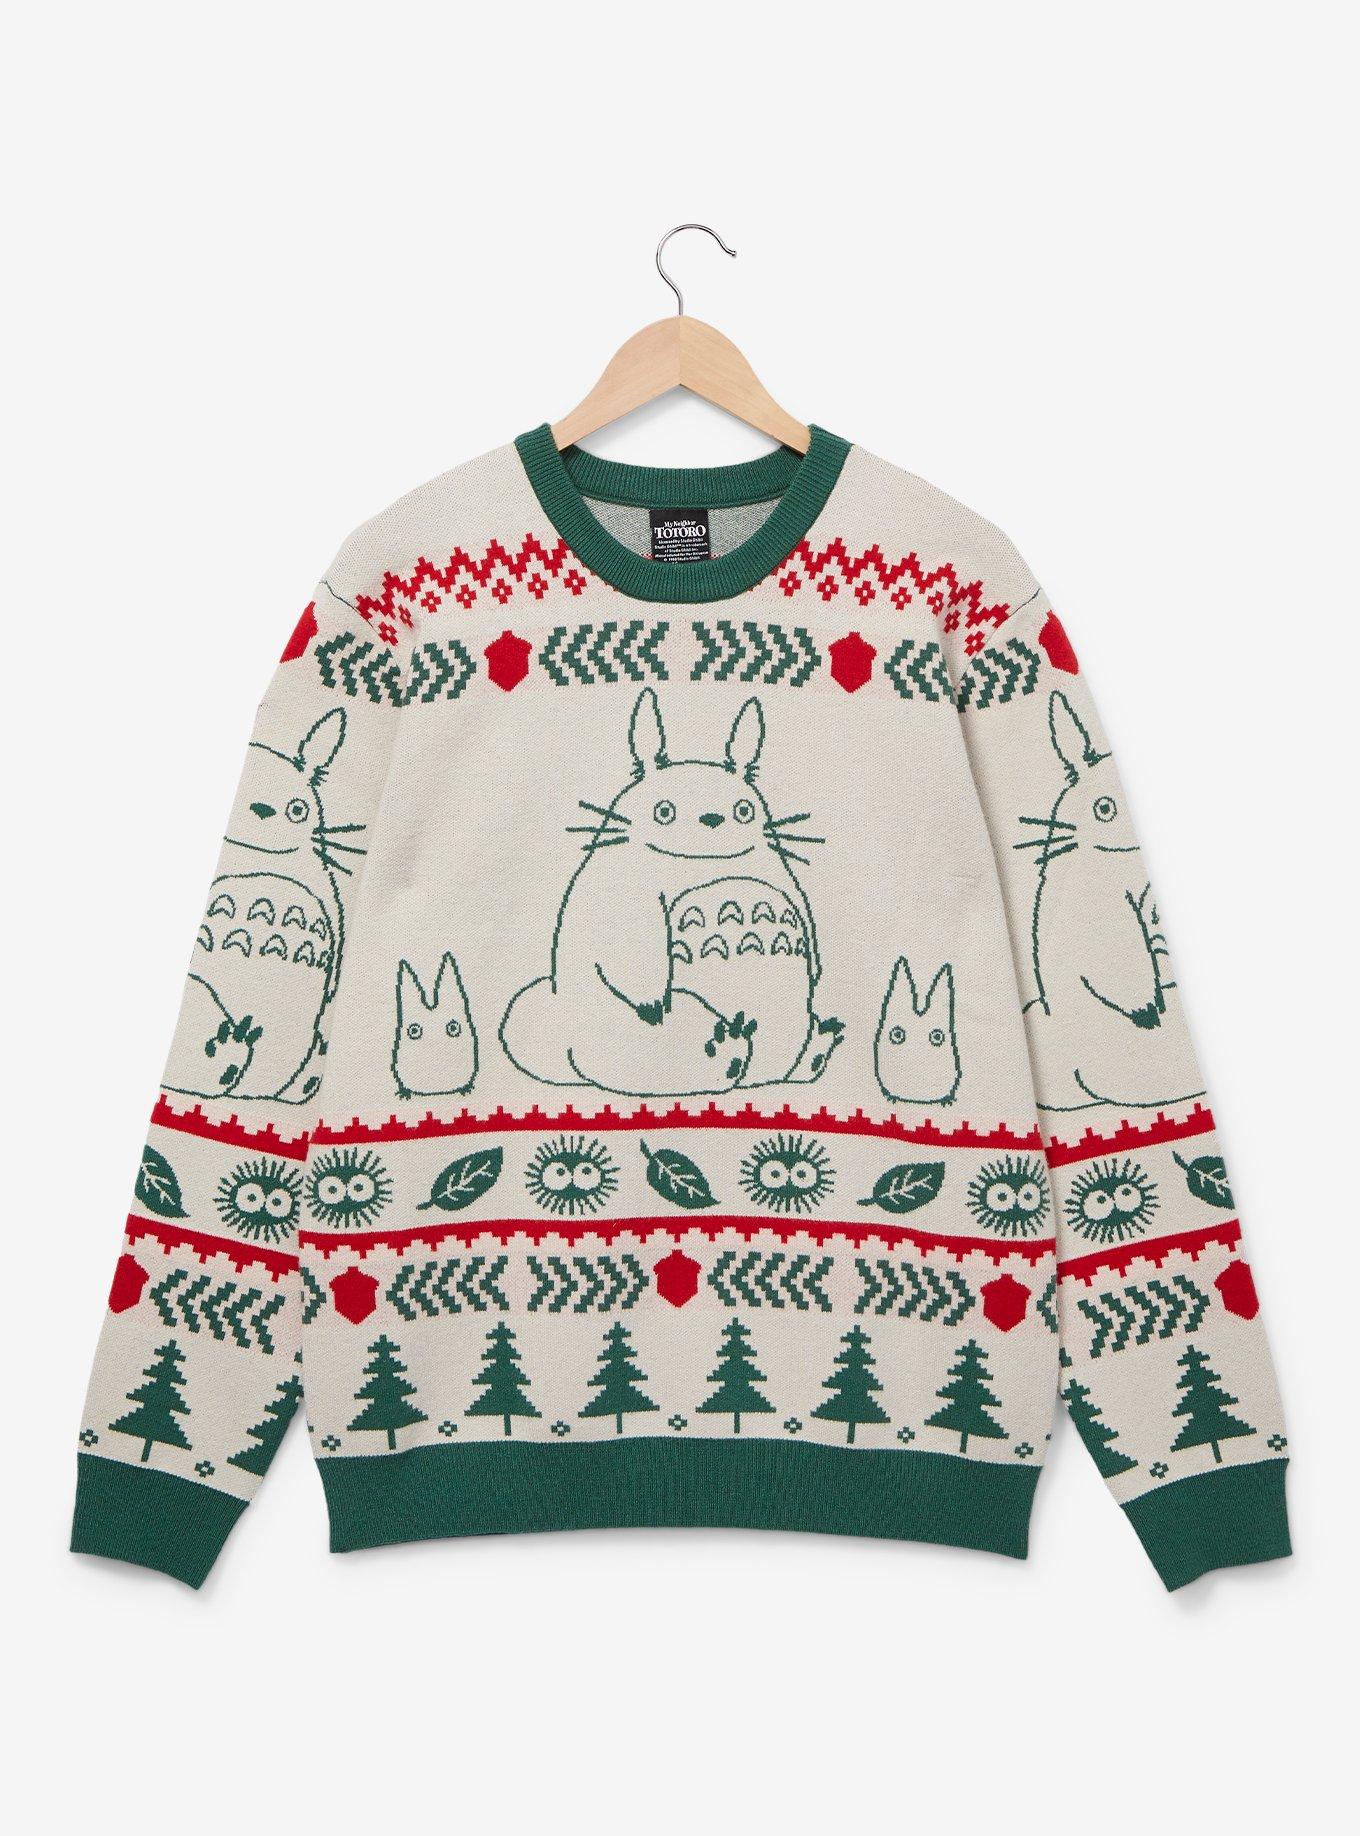 Studio Ghibli My Neighbor Totoro Forest Spirits Holiday Sweater - BoxLunch Exclusive, OFF WHITE, hi-res